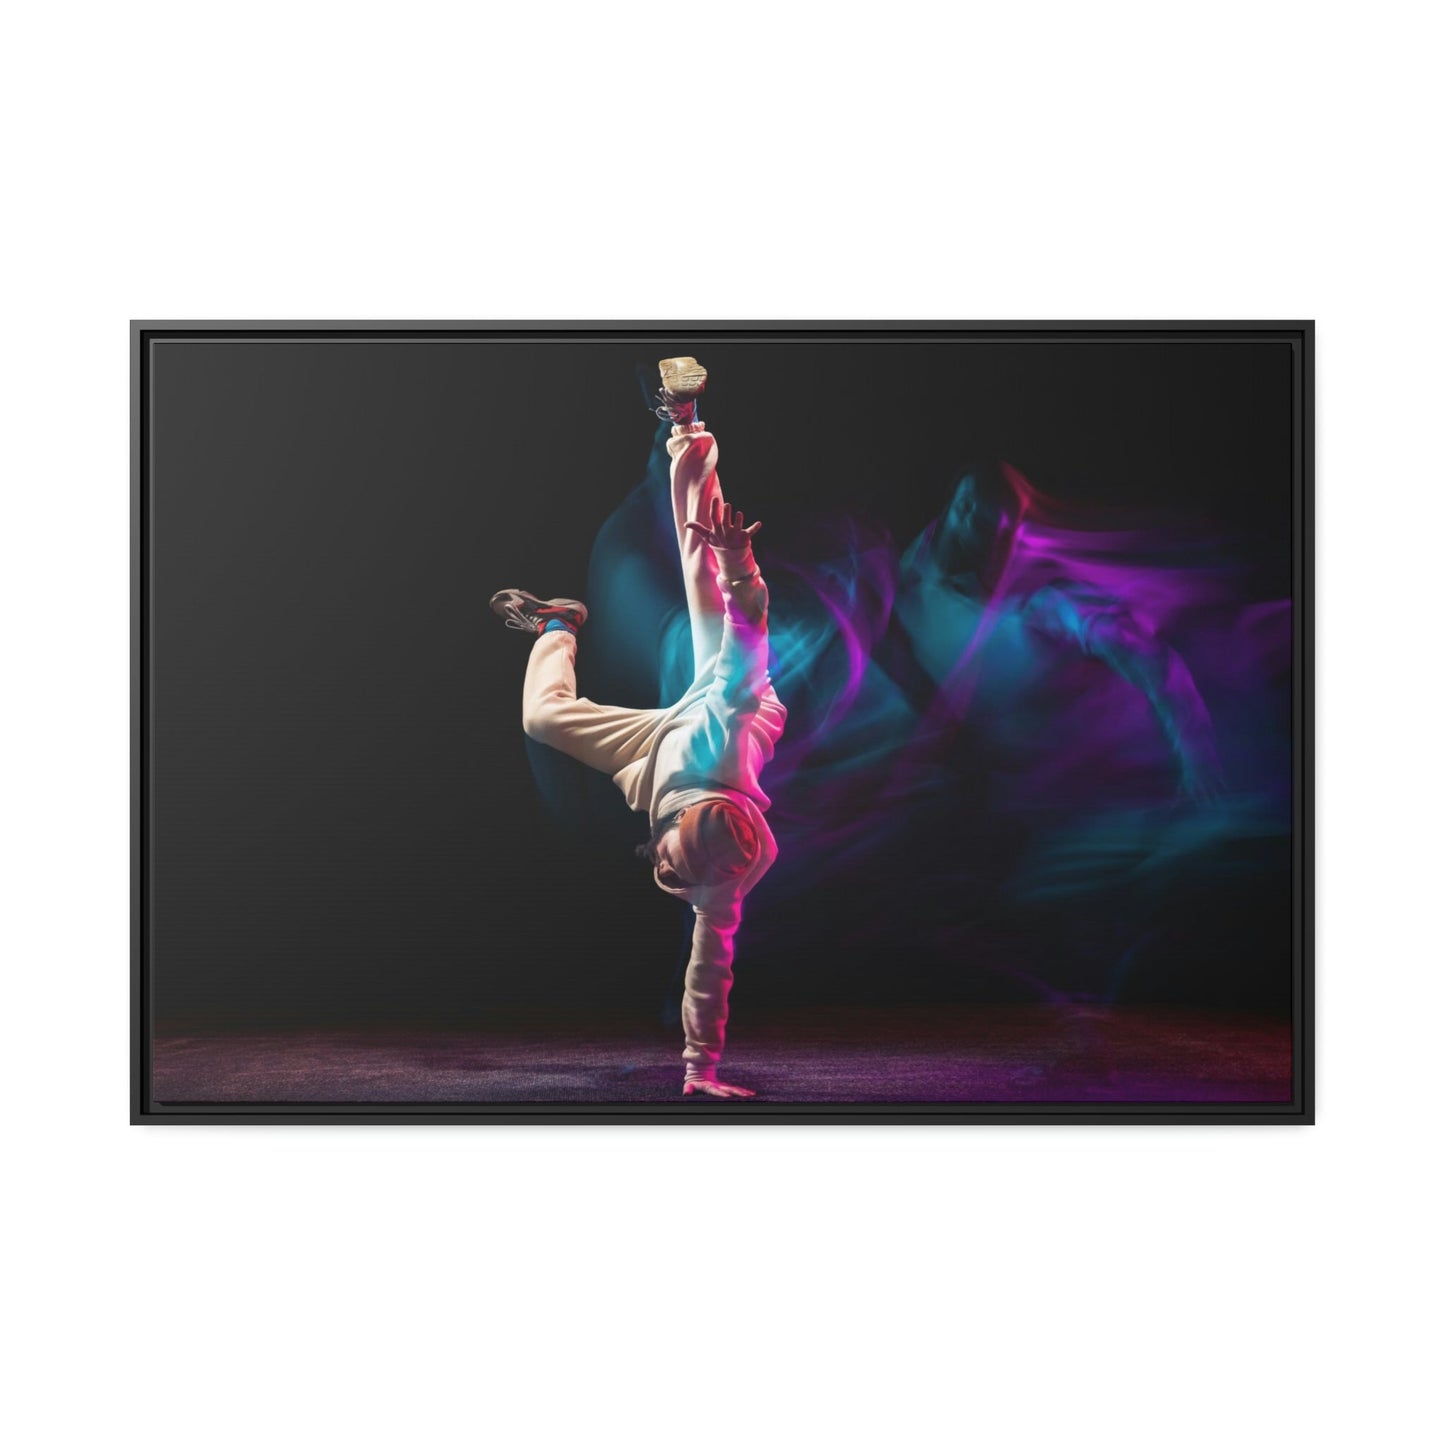 Art of Movement: Natural Canvas and Framed Poster of Dance Choreography